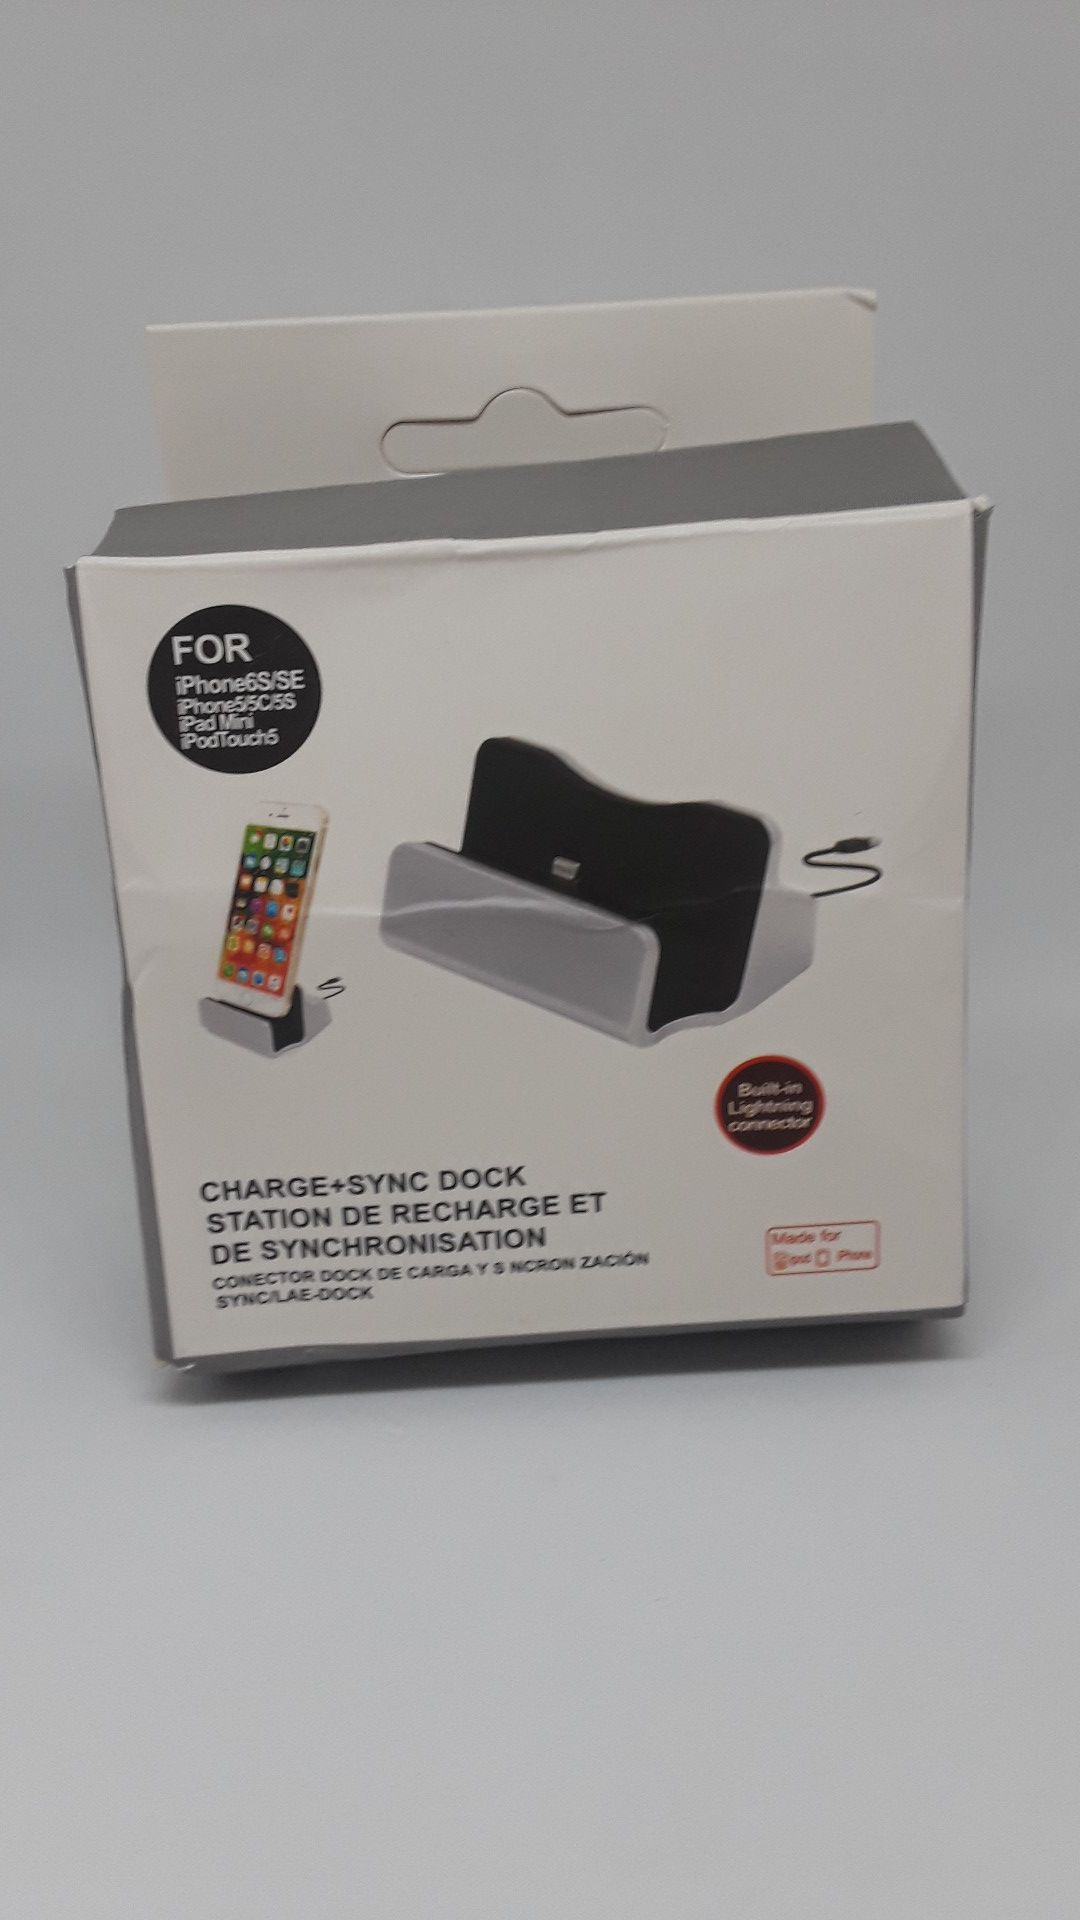 Charging and sync dock station